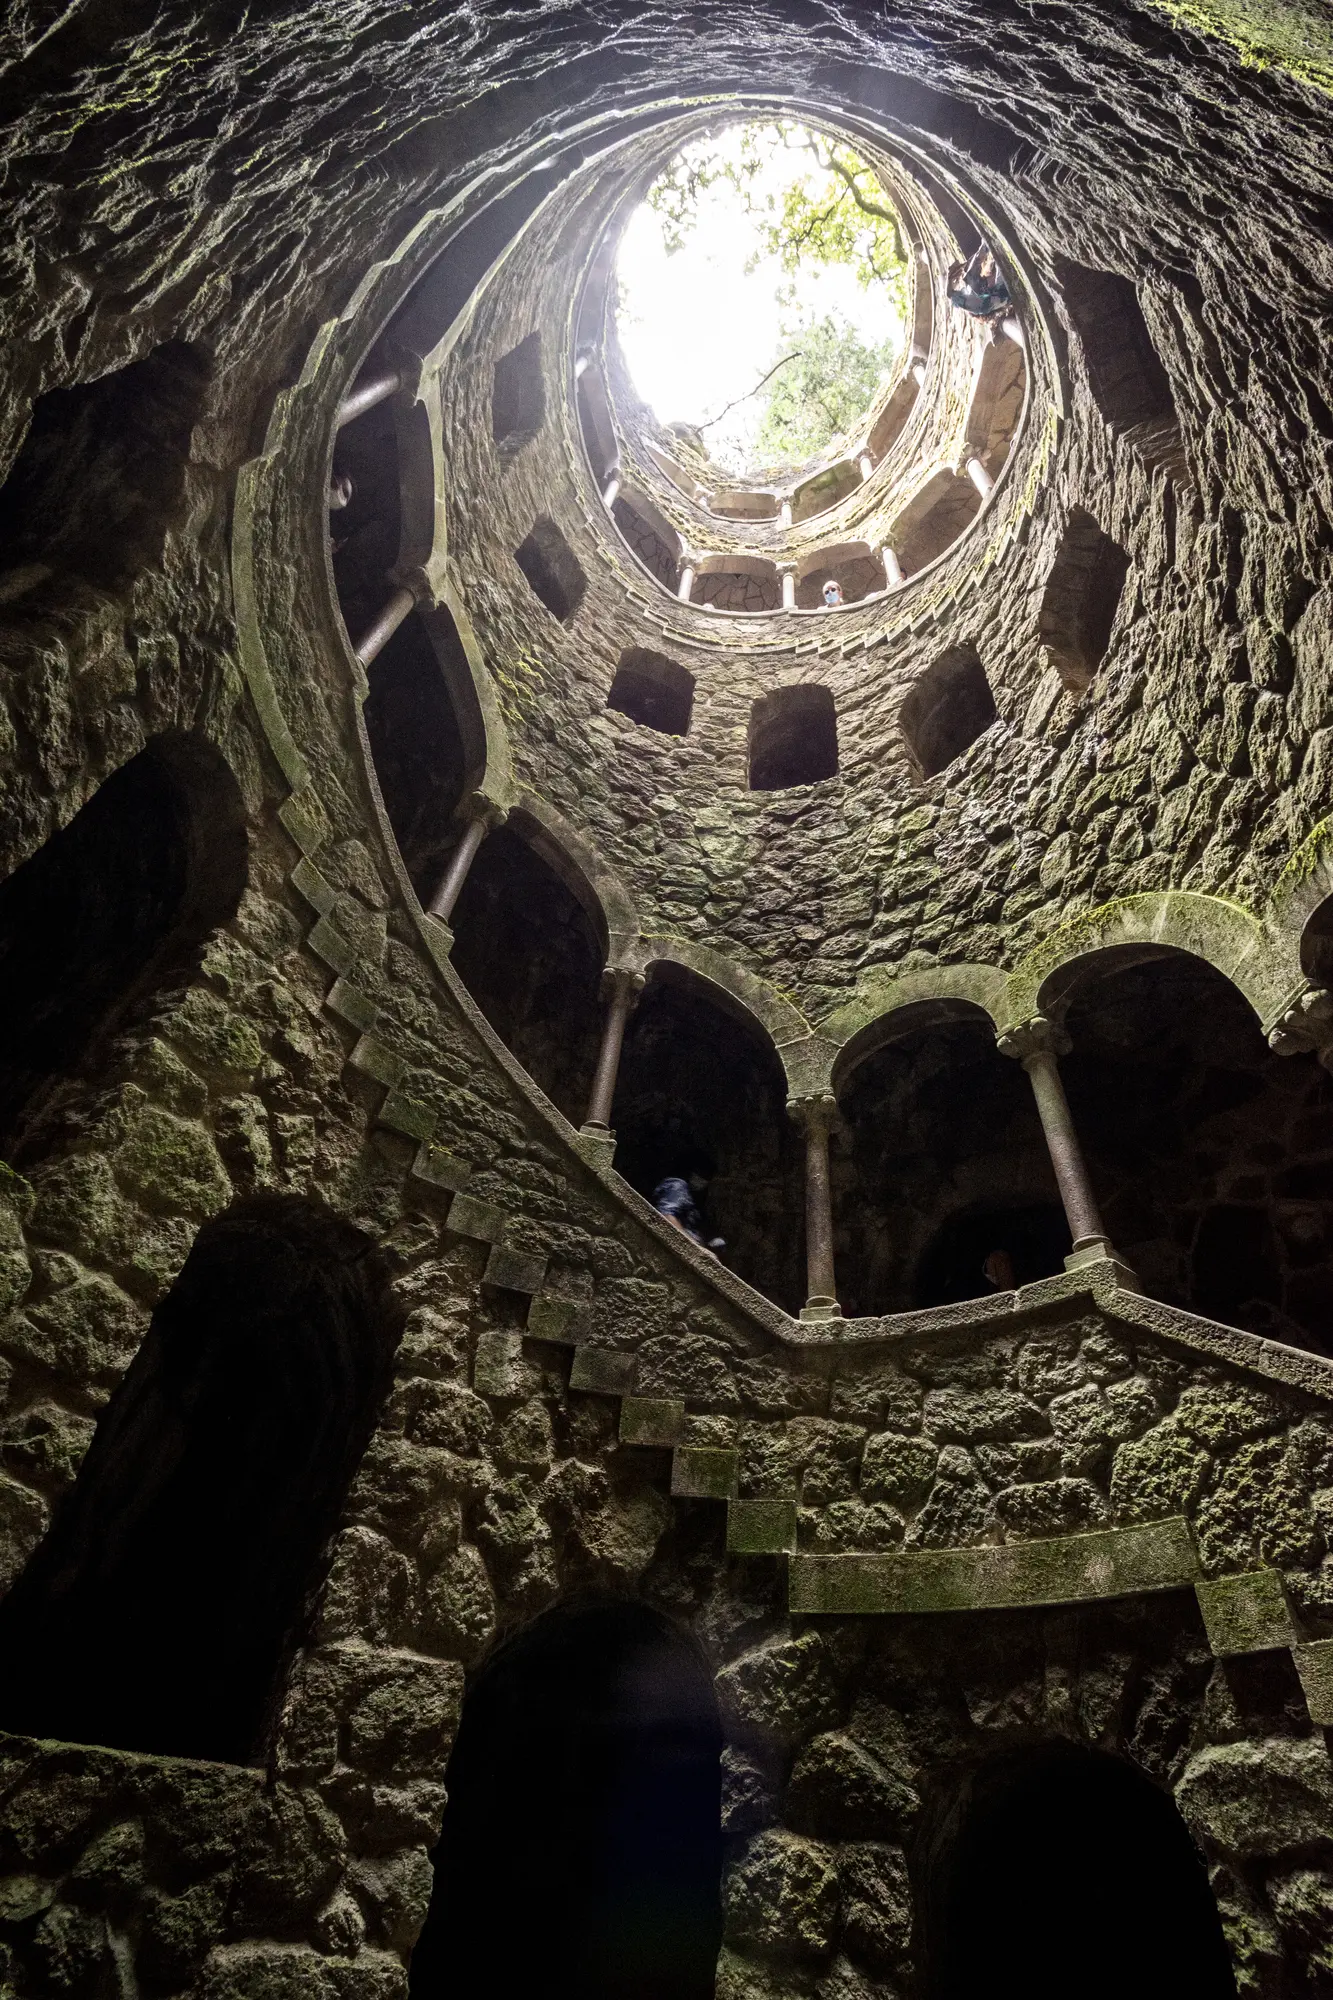 Looking from the bottom up in the stone initiation well at Quinta da Regaleira, with a staircase and arches running up it. 